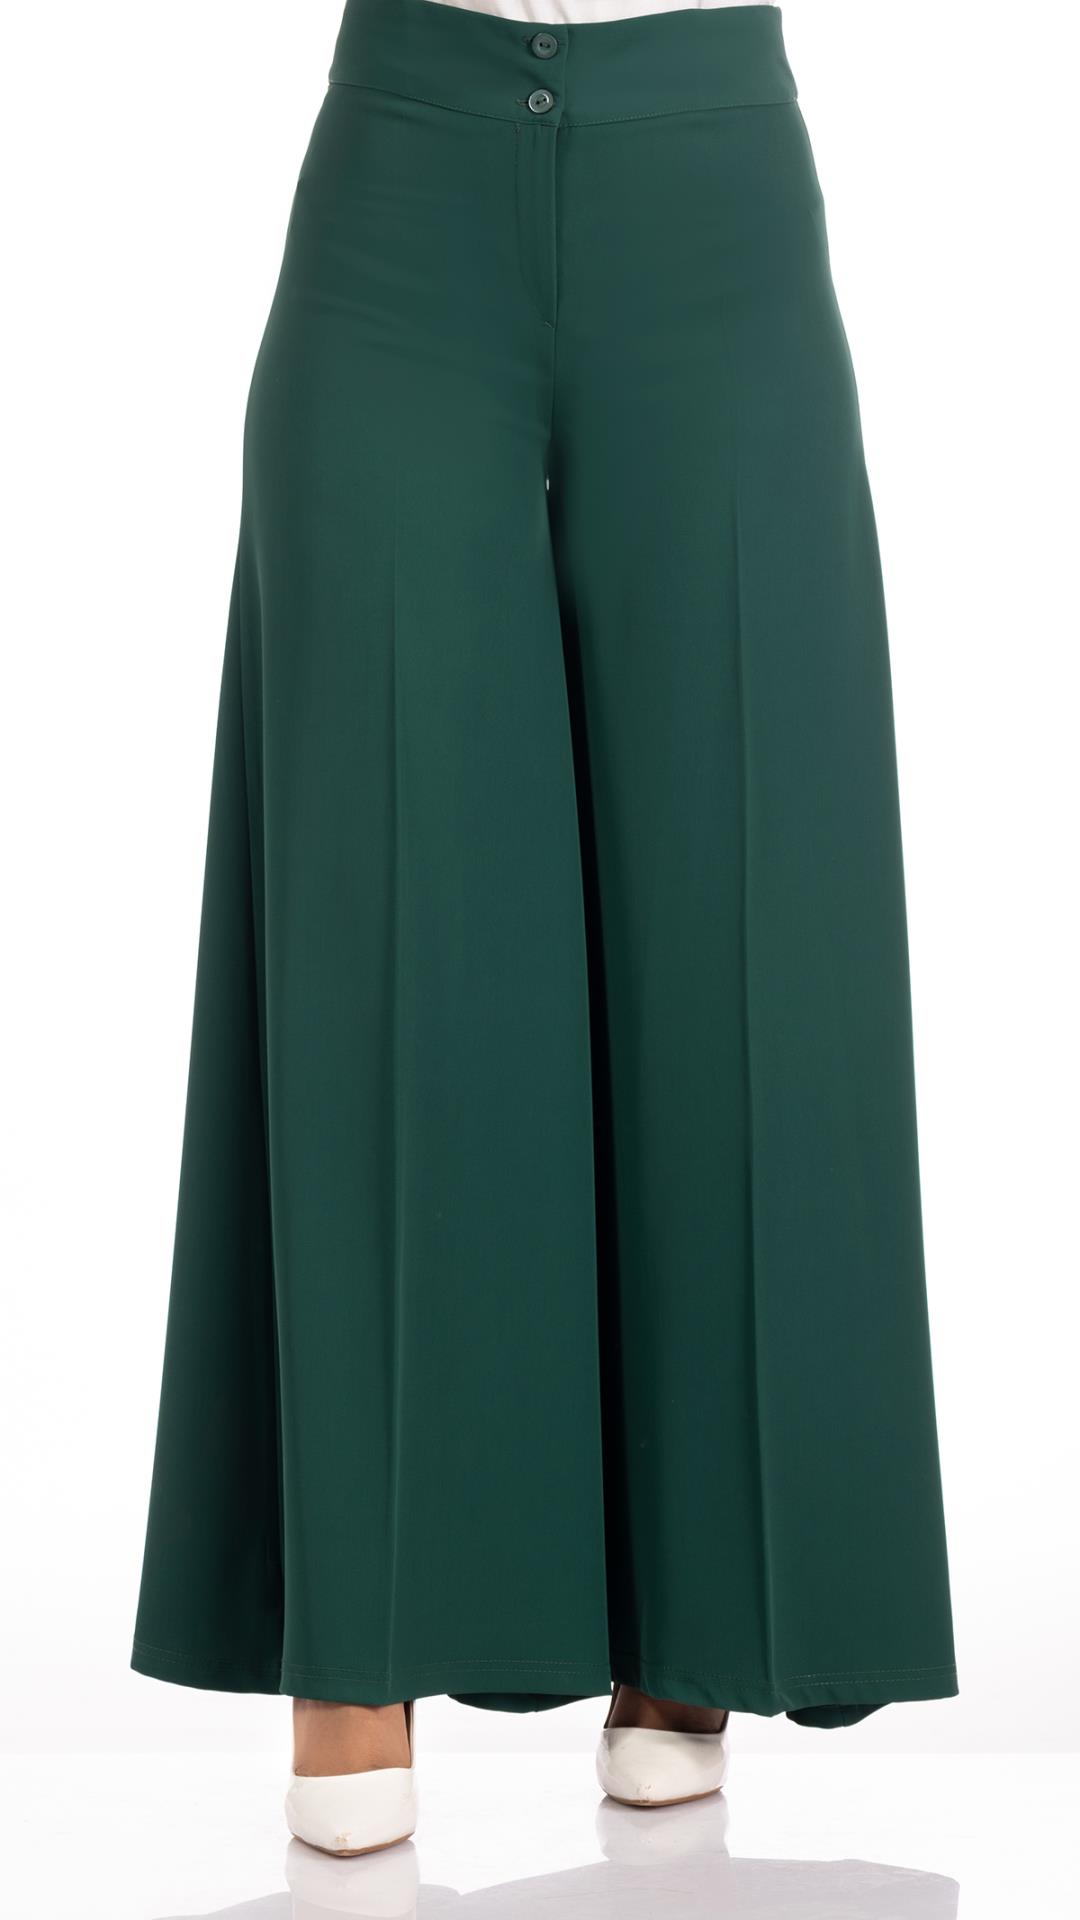 Wide cut trousers with distinctive summer material